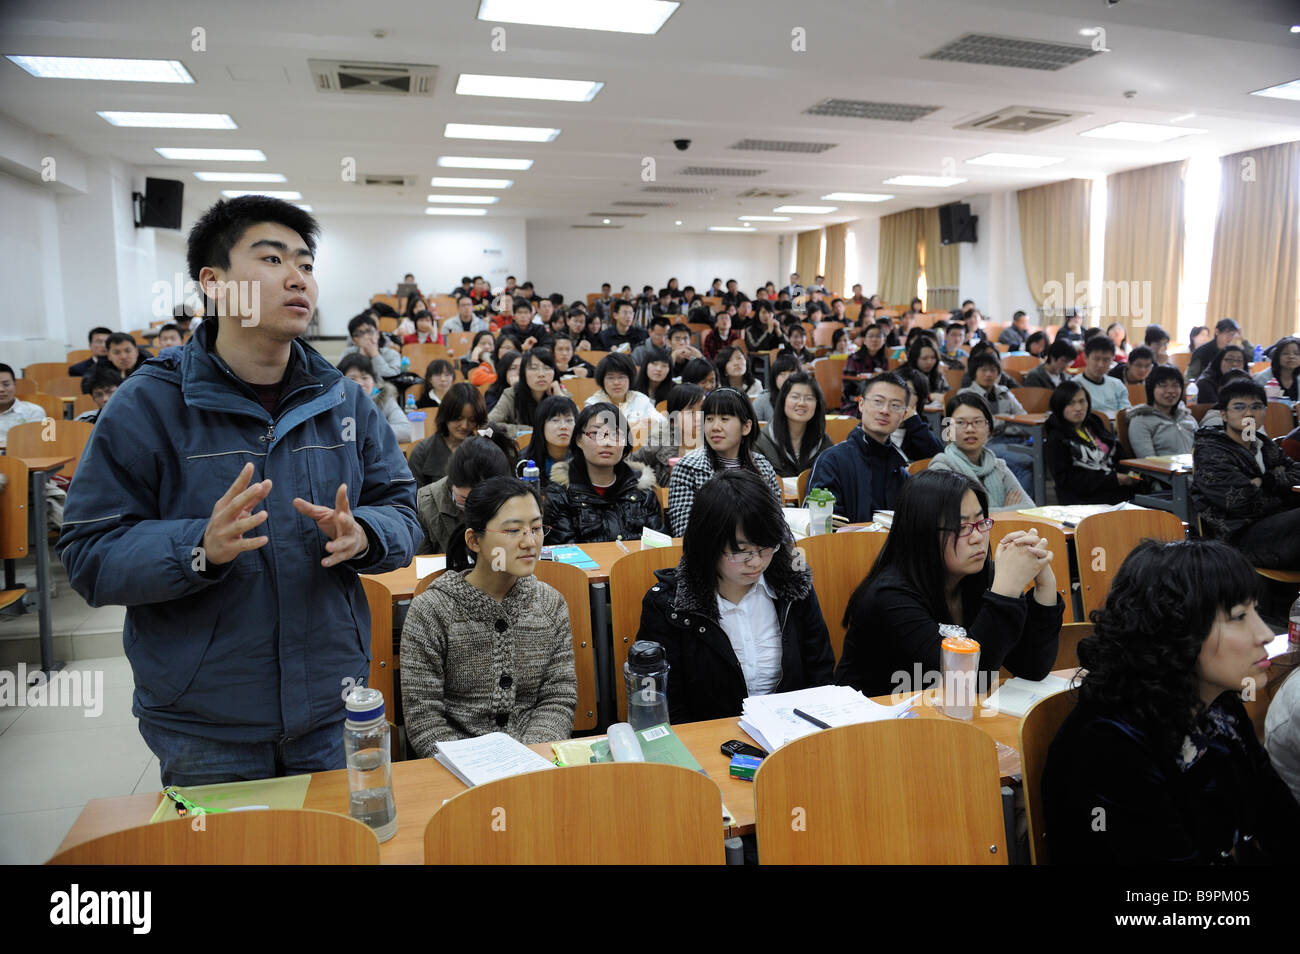 Chinese university students in classroom. 28-Mar-2009 Stock Photo